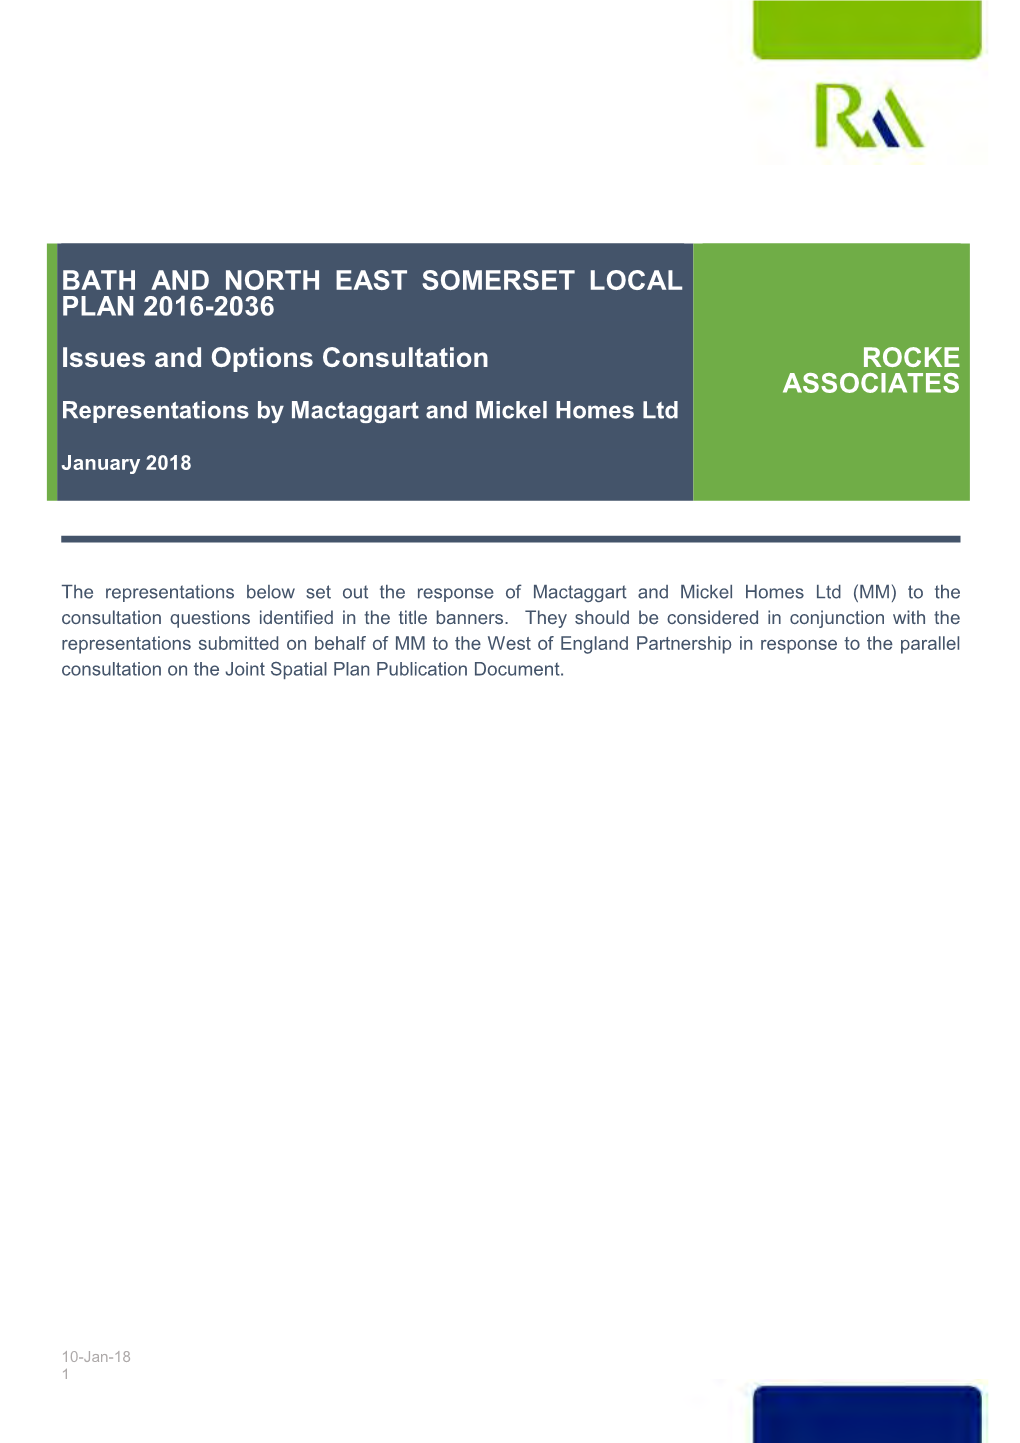 Bath and North East Somerset Local Plan 2016-2036